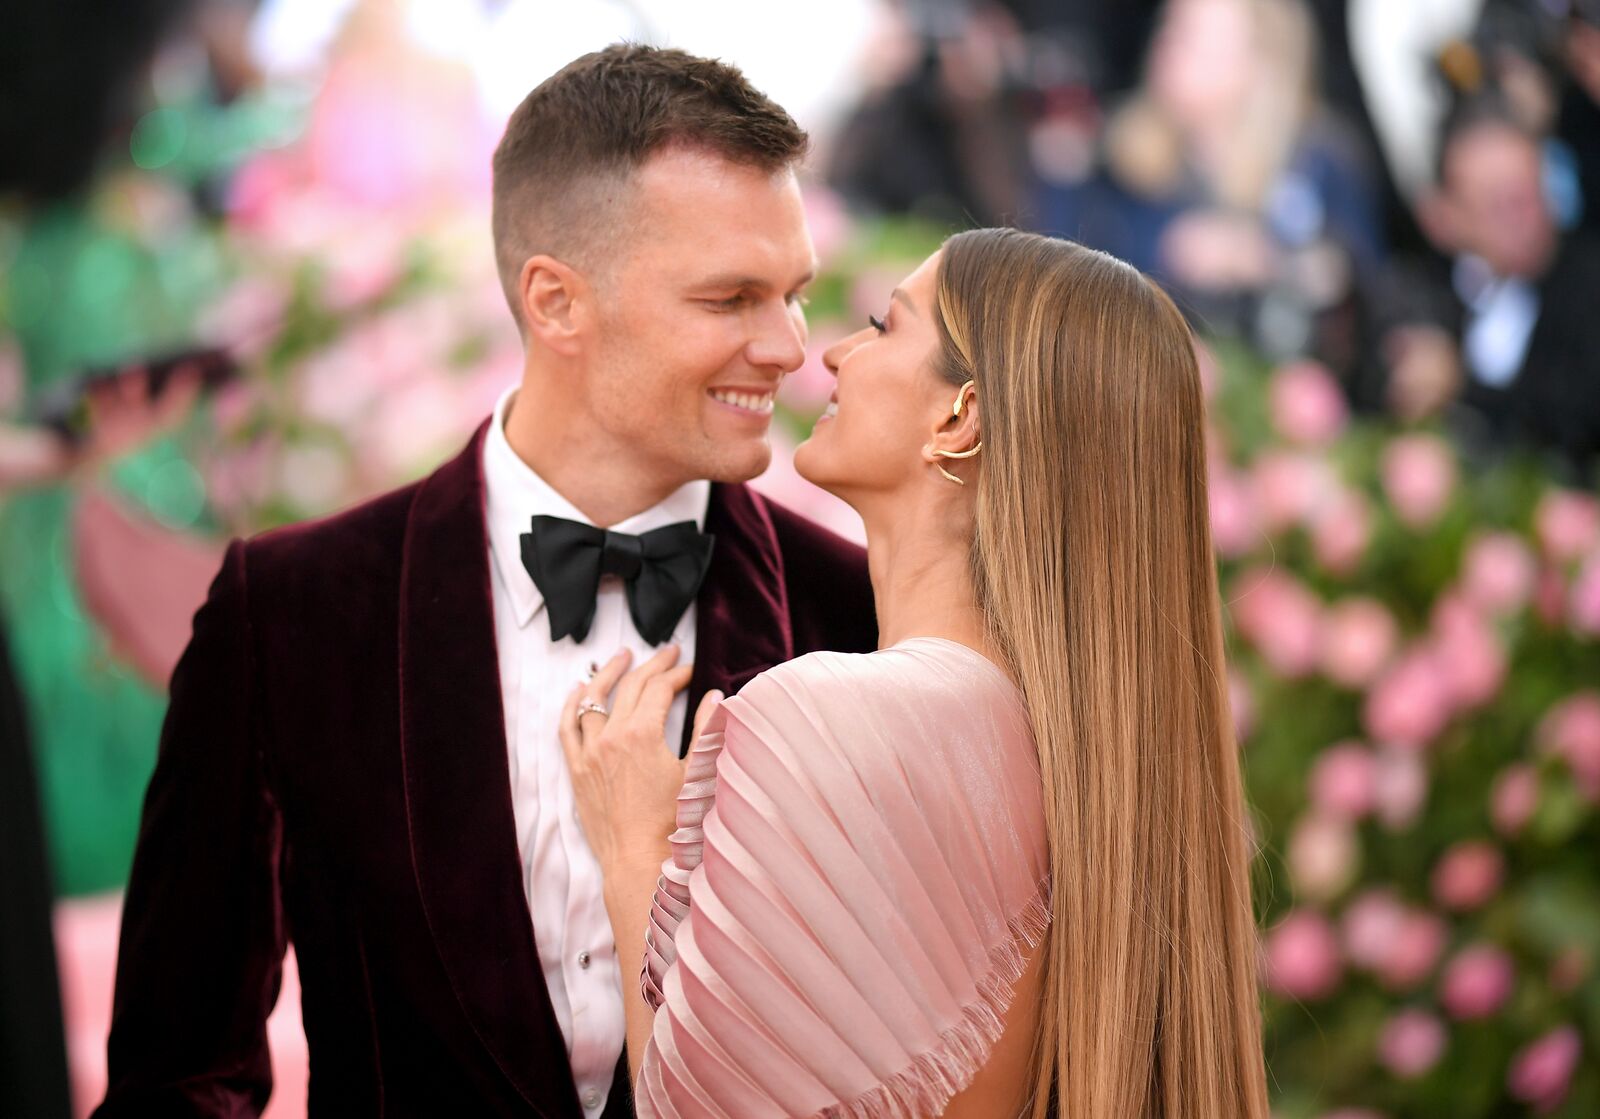 Tom Brady and Gisele Bundchen attend The 2019 Met Gala Celebrating Camp: Notes on Fashion at Metropolitan Museum of Art on May 06, 2019 in New York City | Photo: Getty Images